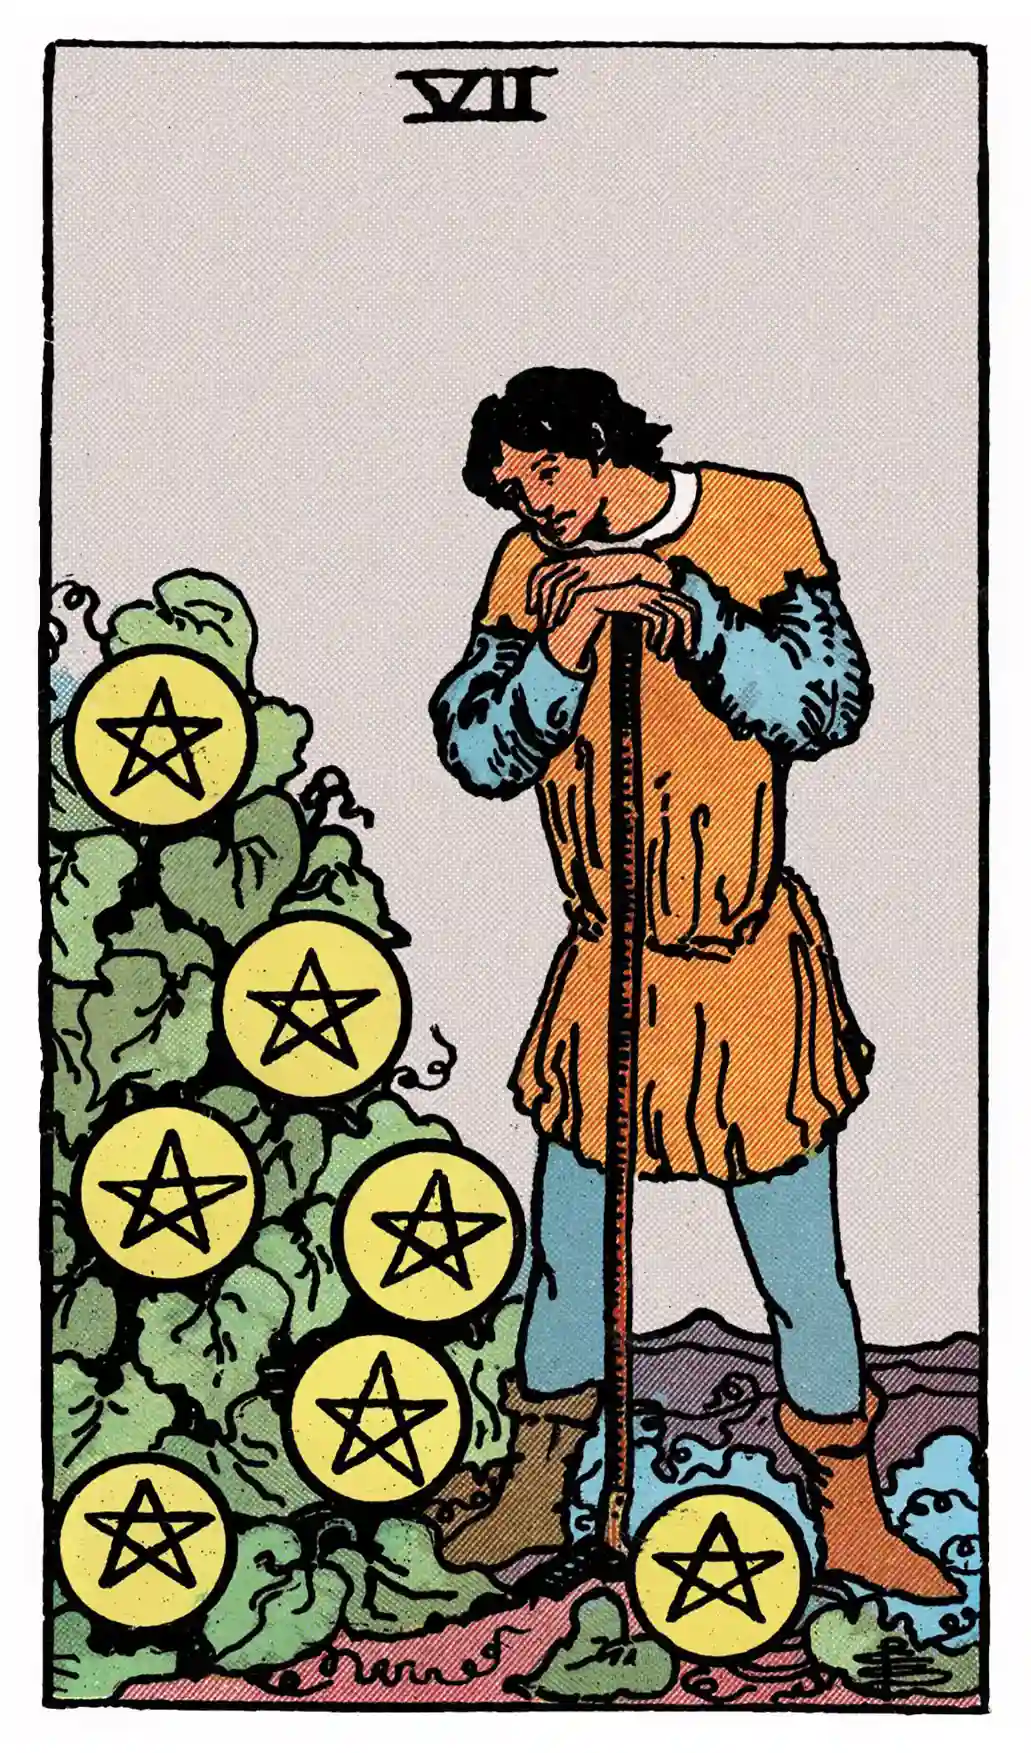 70 Seven of Pentacles (Upright)